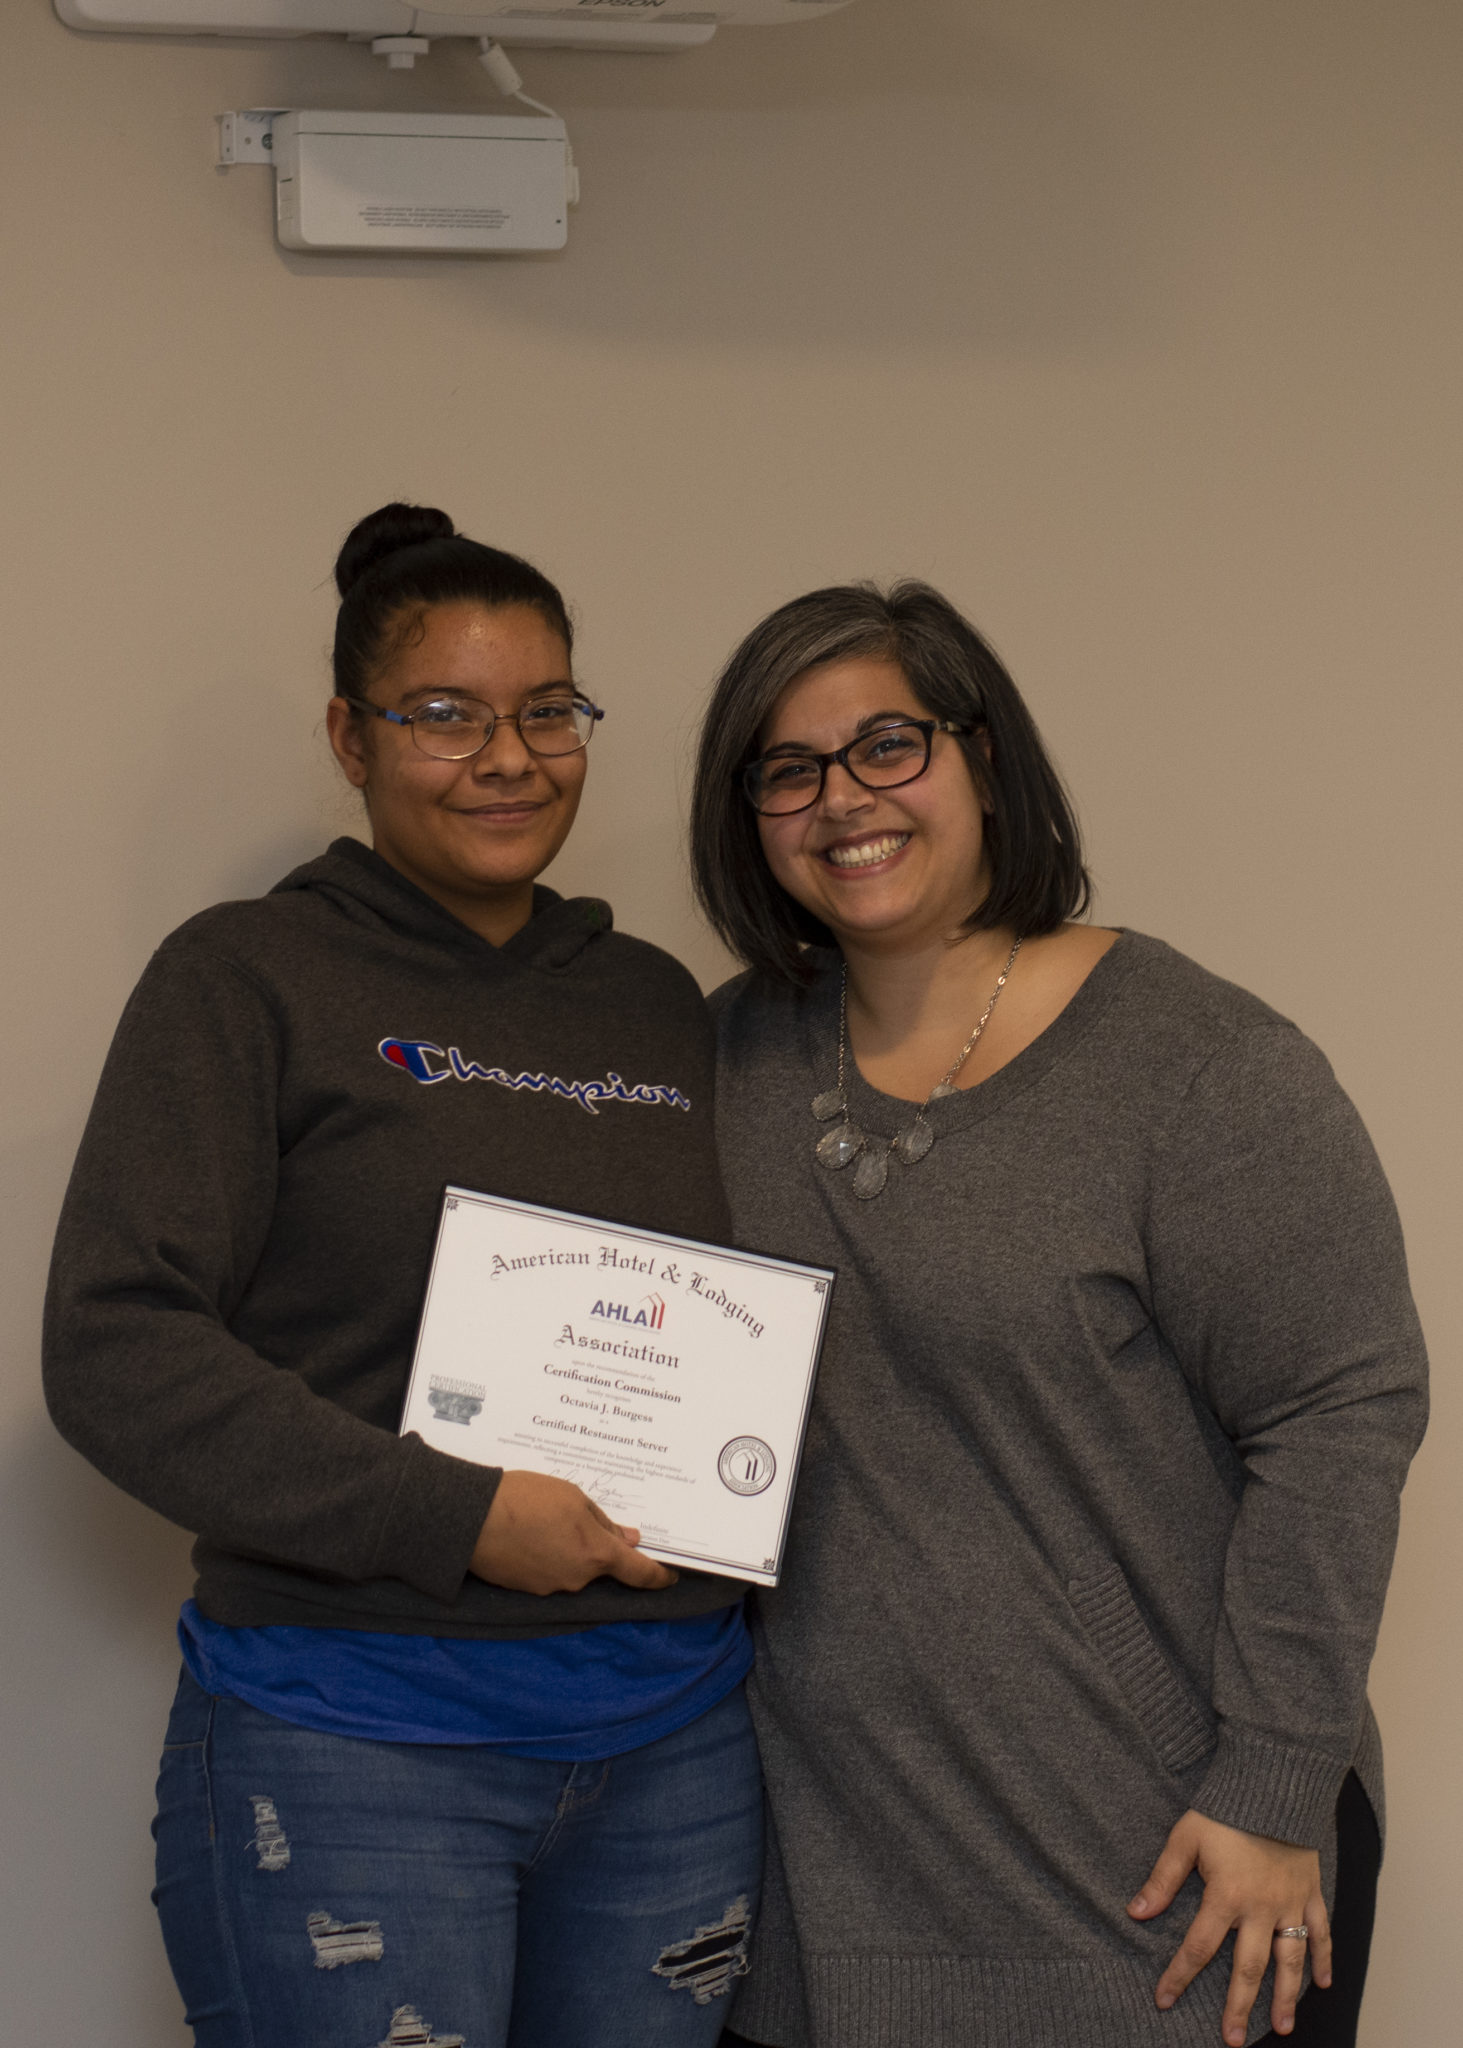 Two women smile at the camera, with one holding a certificate